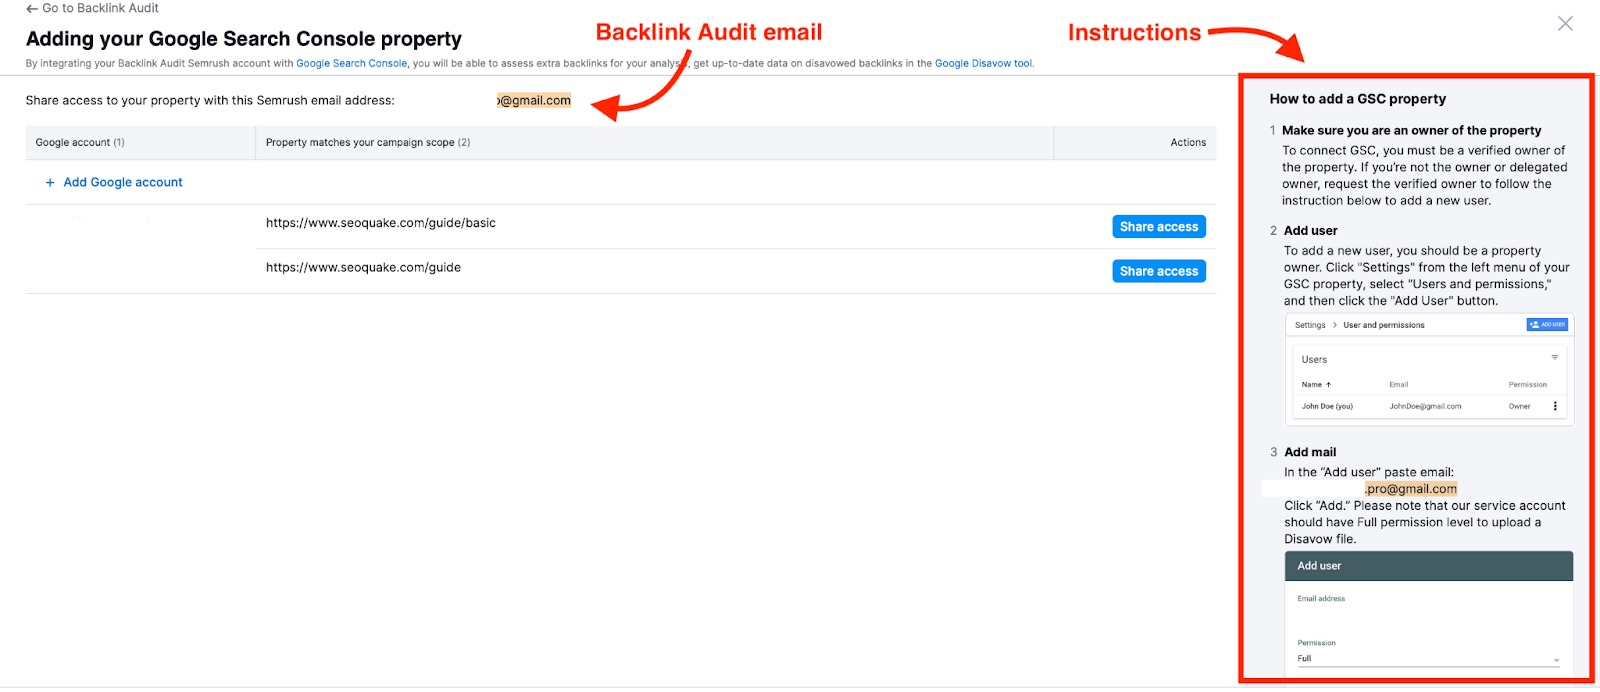 Connecting Backlink Audit to Google Accounts image 4